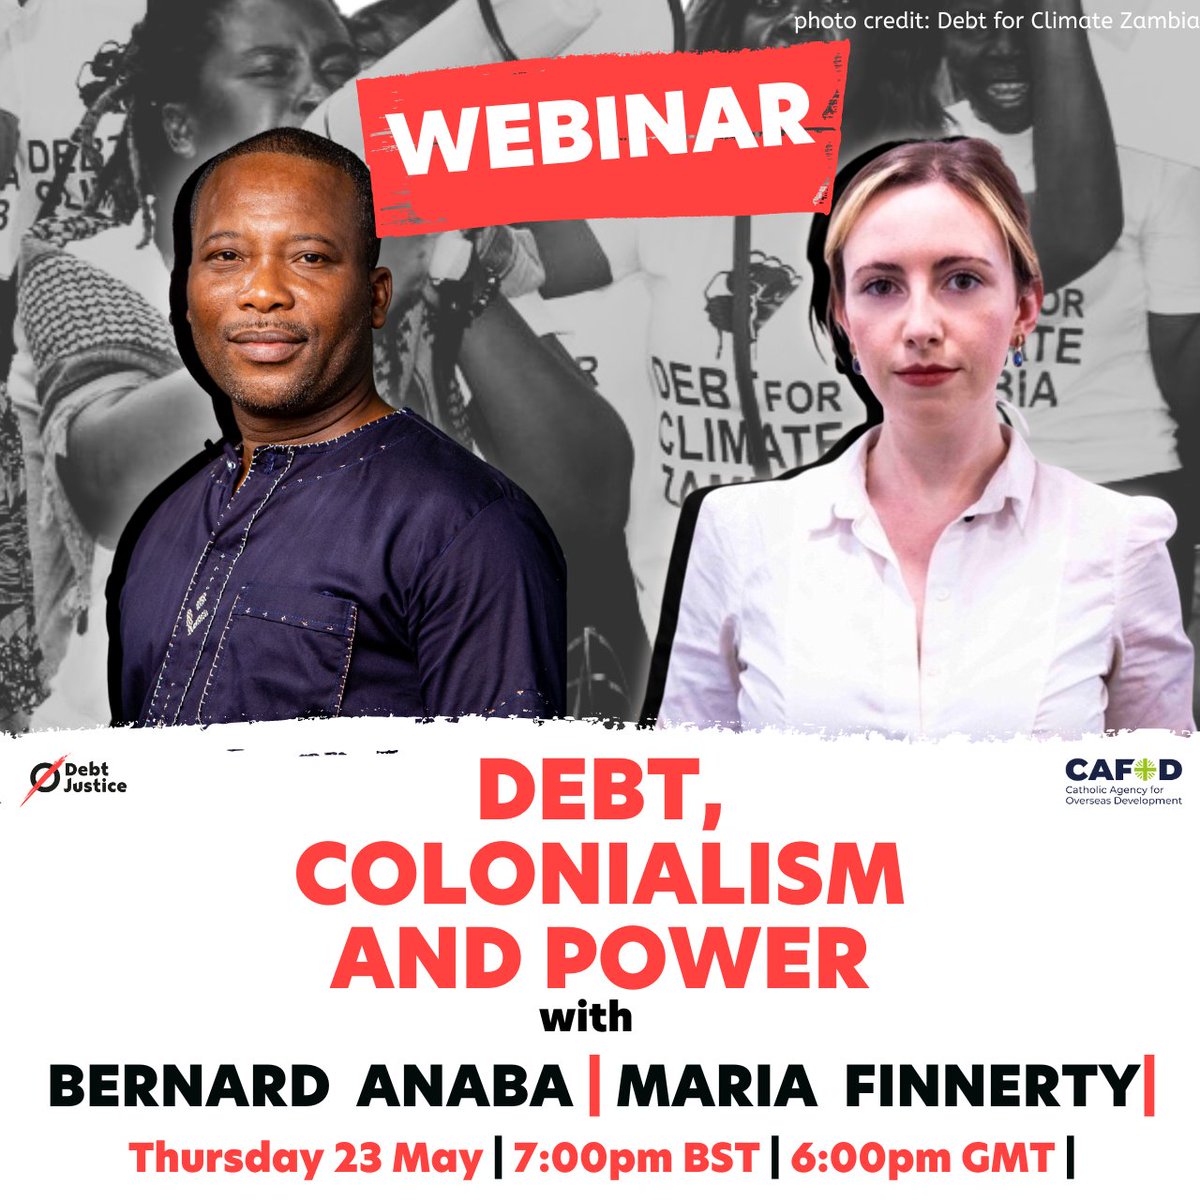 🚨ONLINE EVENT: Debt, Colonialism & Power 🚨

Join @debtjustice & @CAFOD on *23rd May 7pm* (BST) to explore colonialism's debt legacy, today's debt crisis - & how we fight it ✊🏾

W/ debt campaigner Bernard Anaba & CAFOD's Maria Finnerty🔥

act.debtjustice.org.uk/online-event-d…

#CanceltheDebt